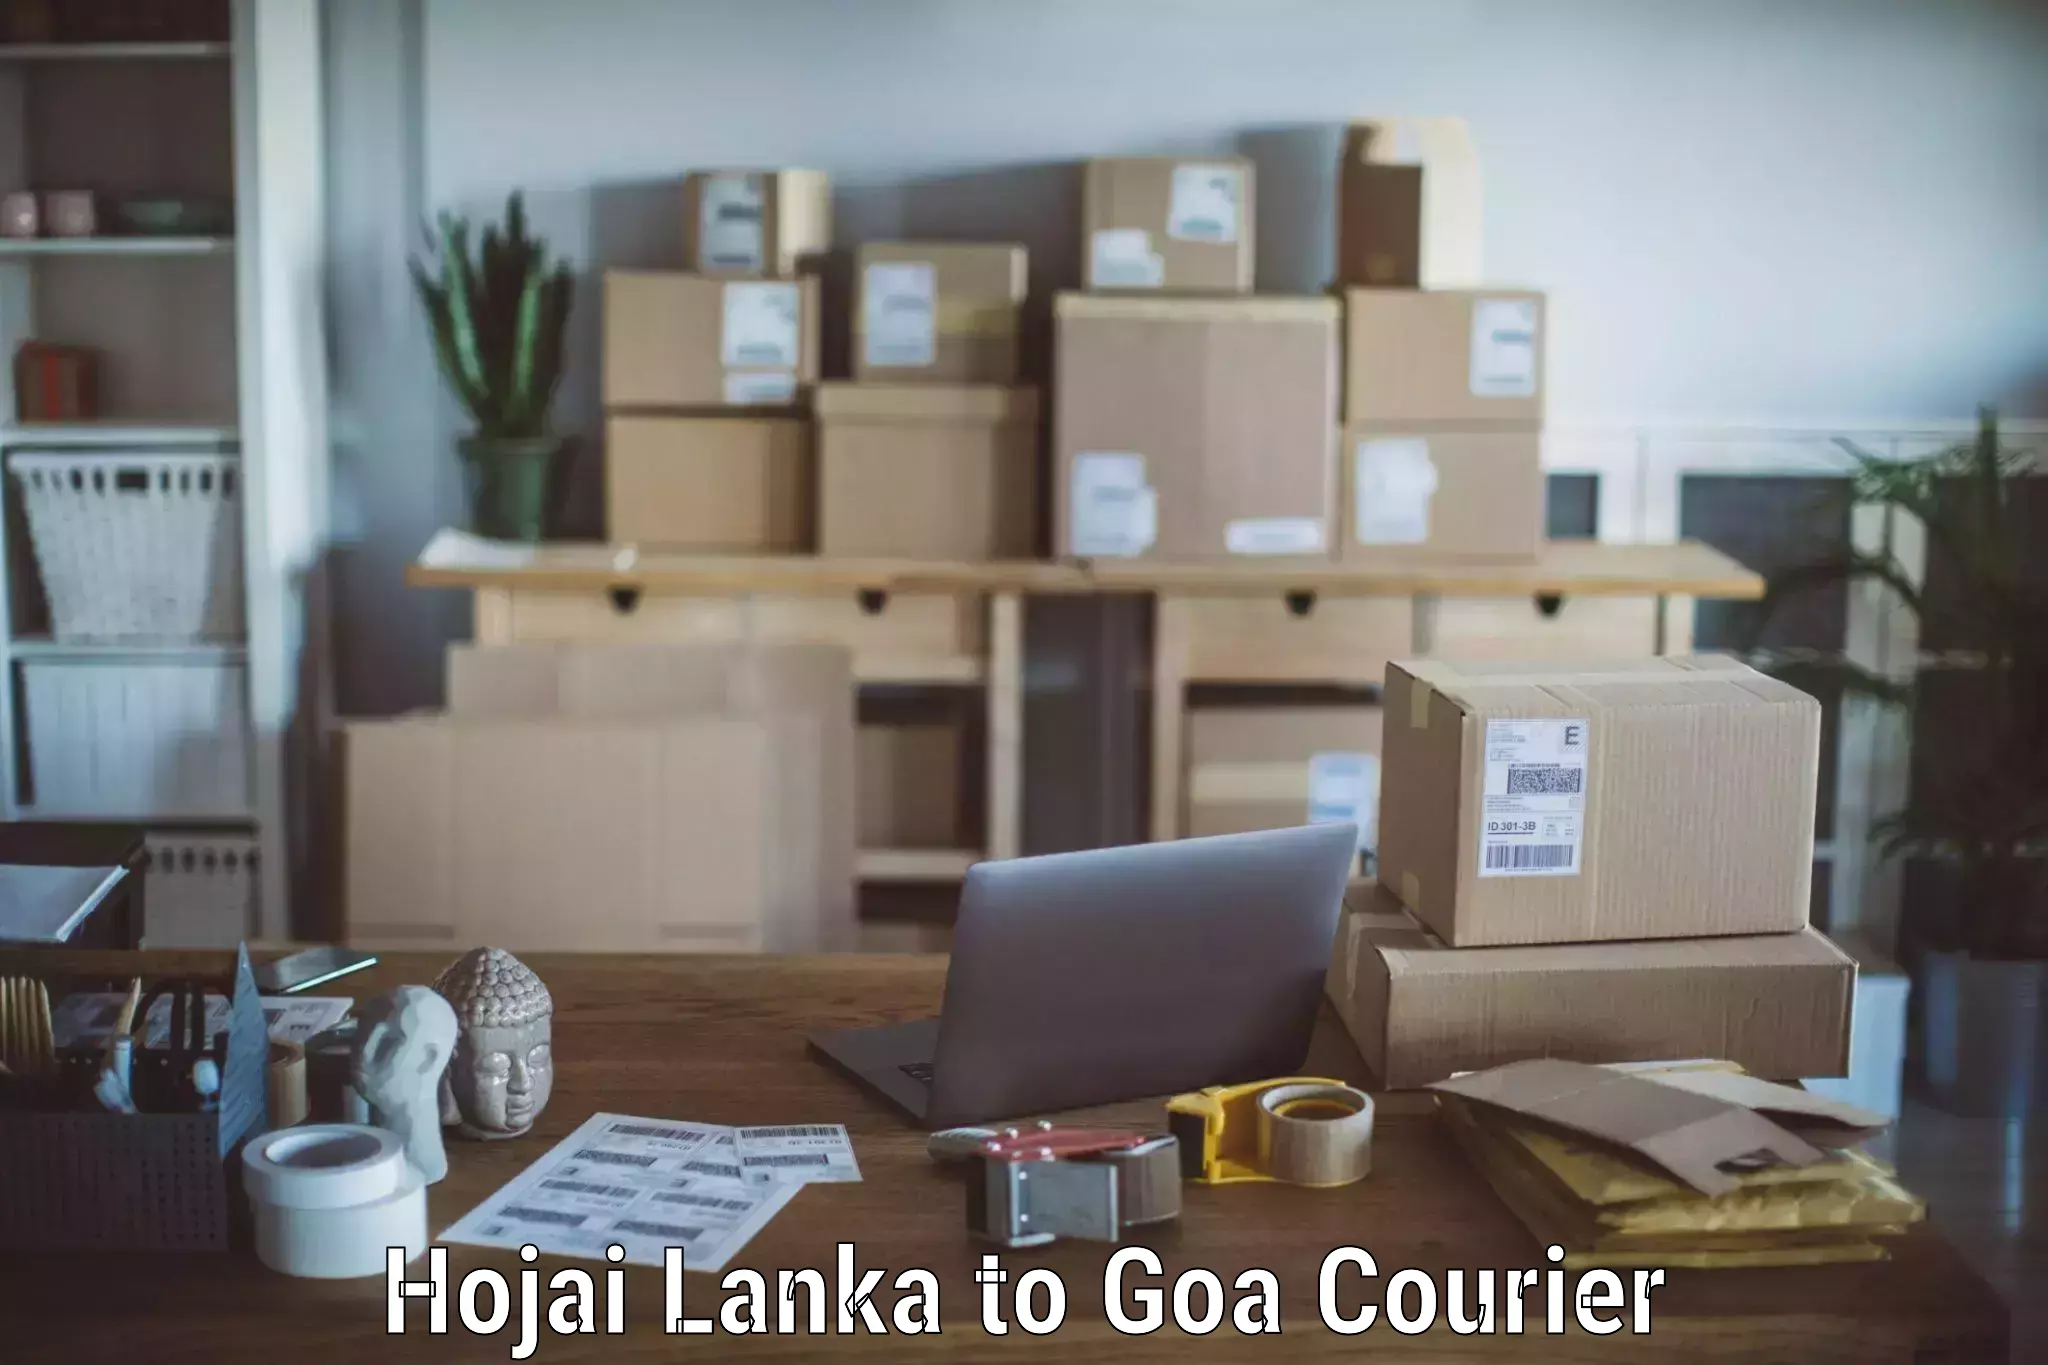 Trusted furniture transport in Hojai Lanka to South Goa